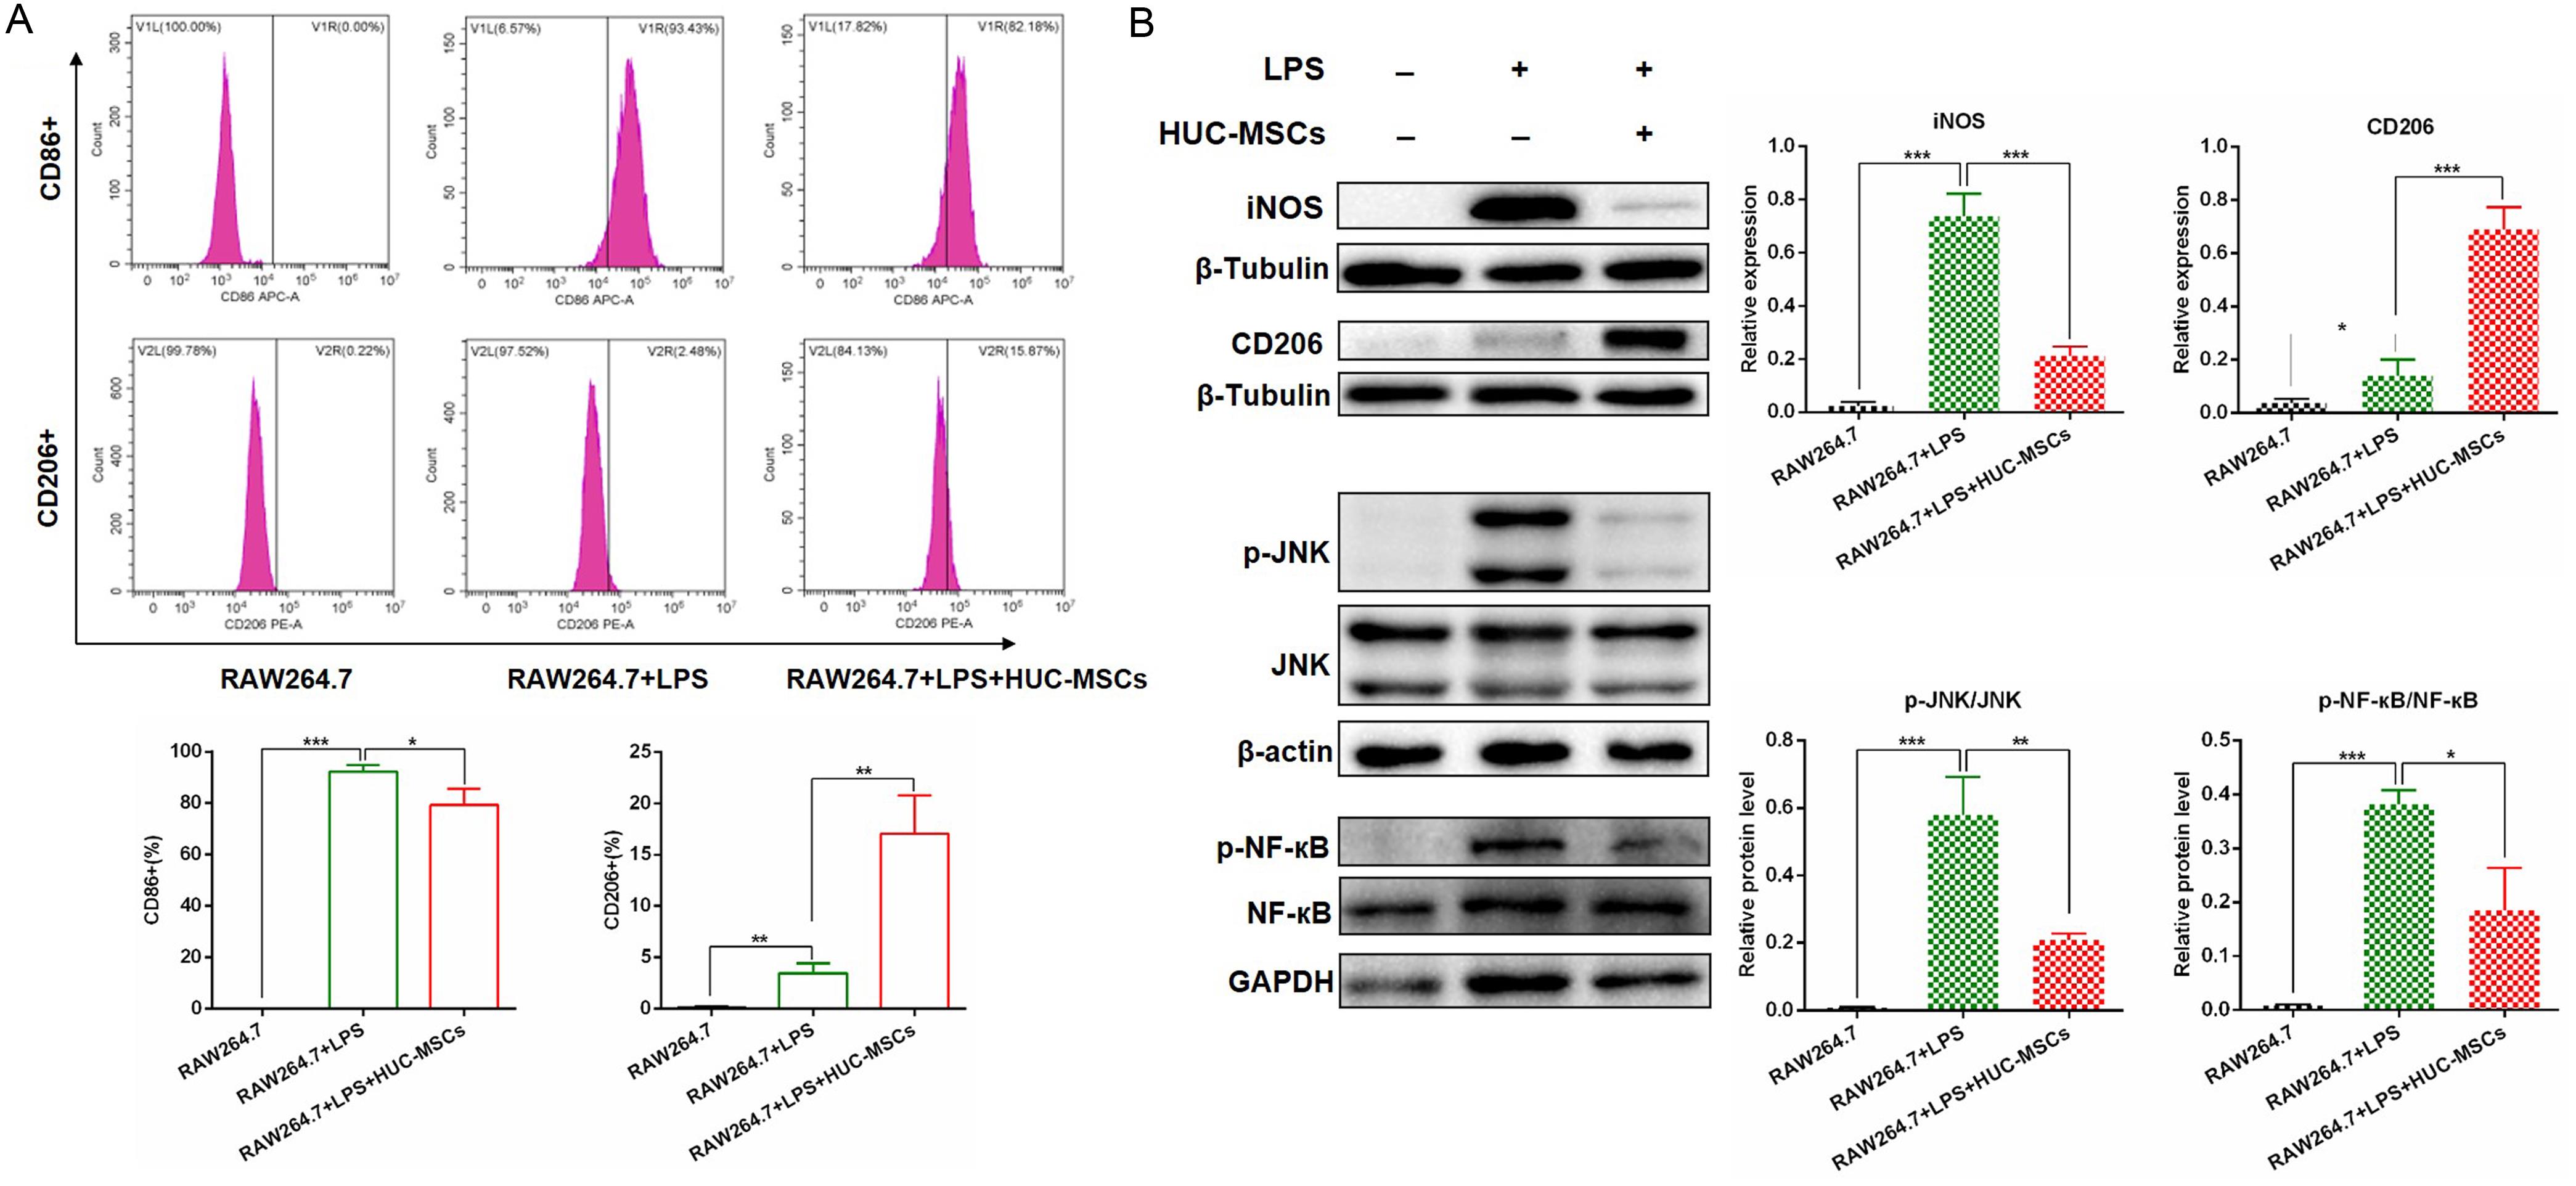 The hUC-MSCs co-culture regulated macrophage polarization through the JNK/NF-кB signaling pathway.